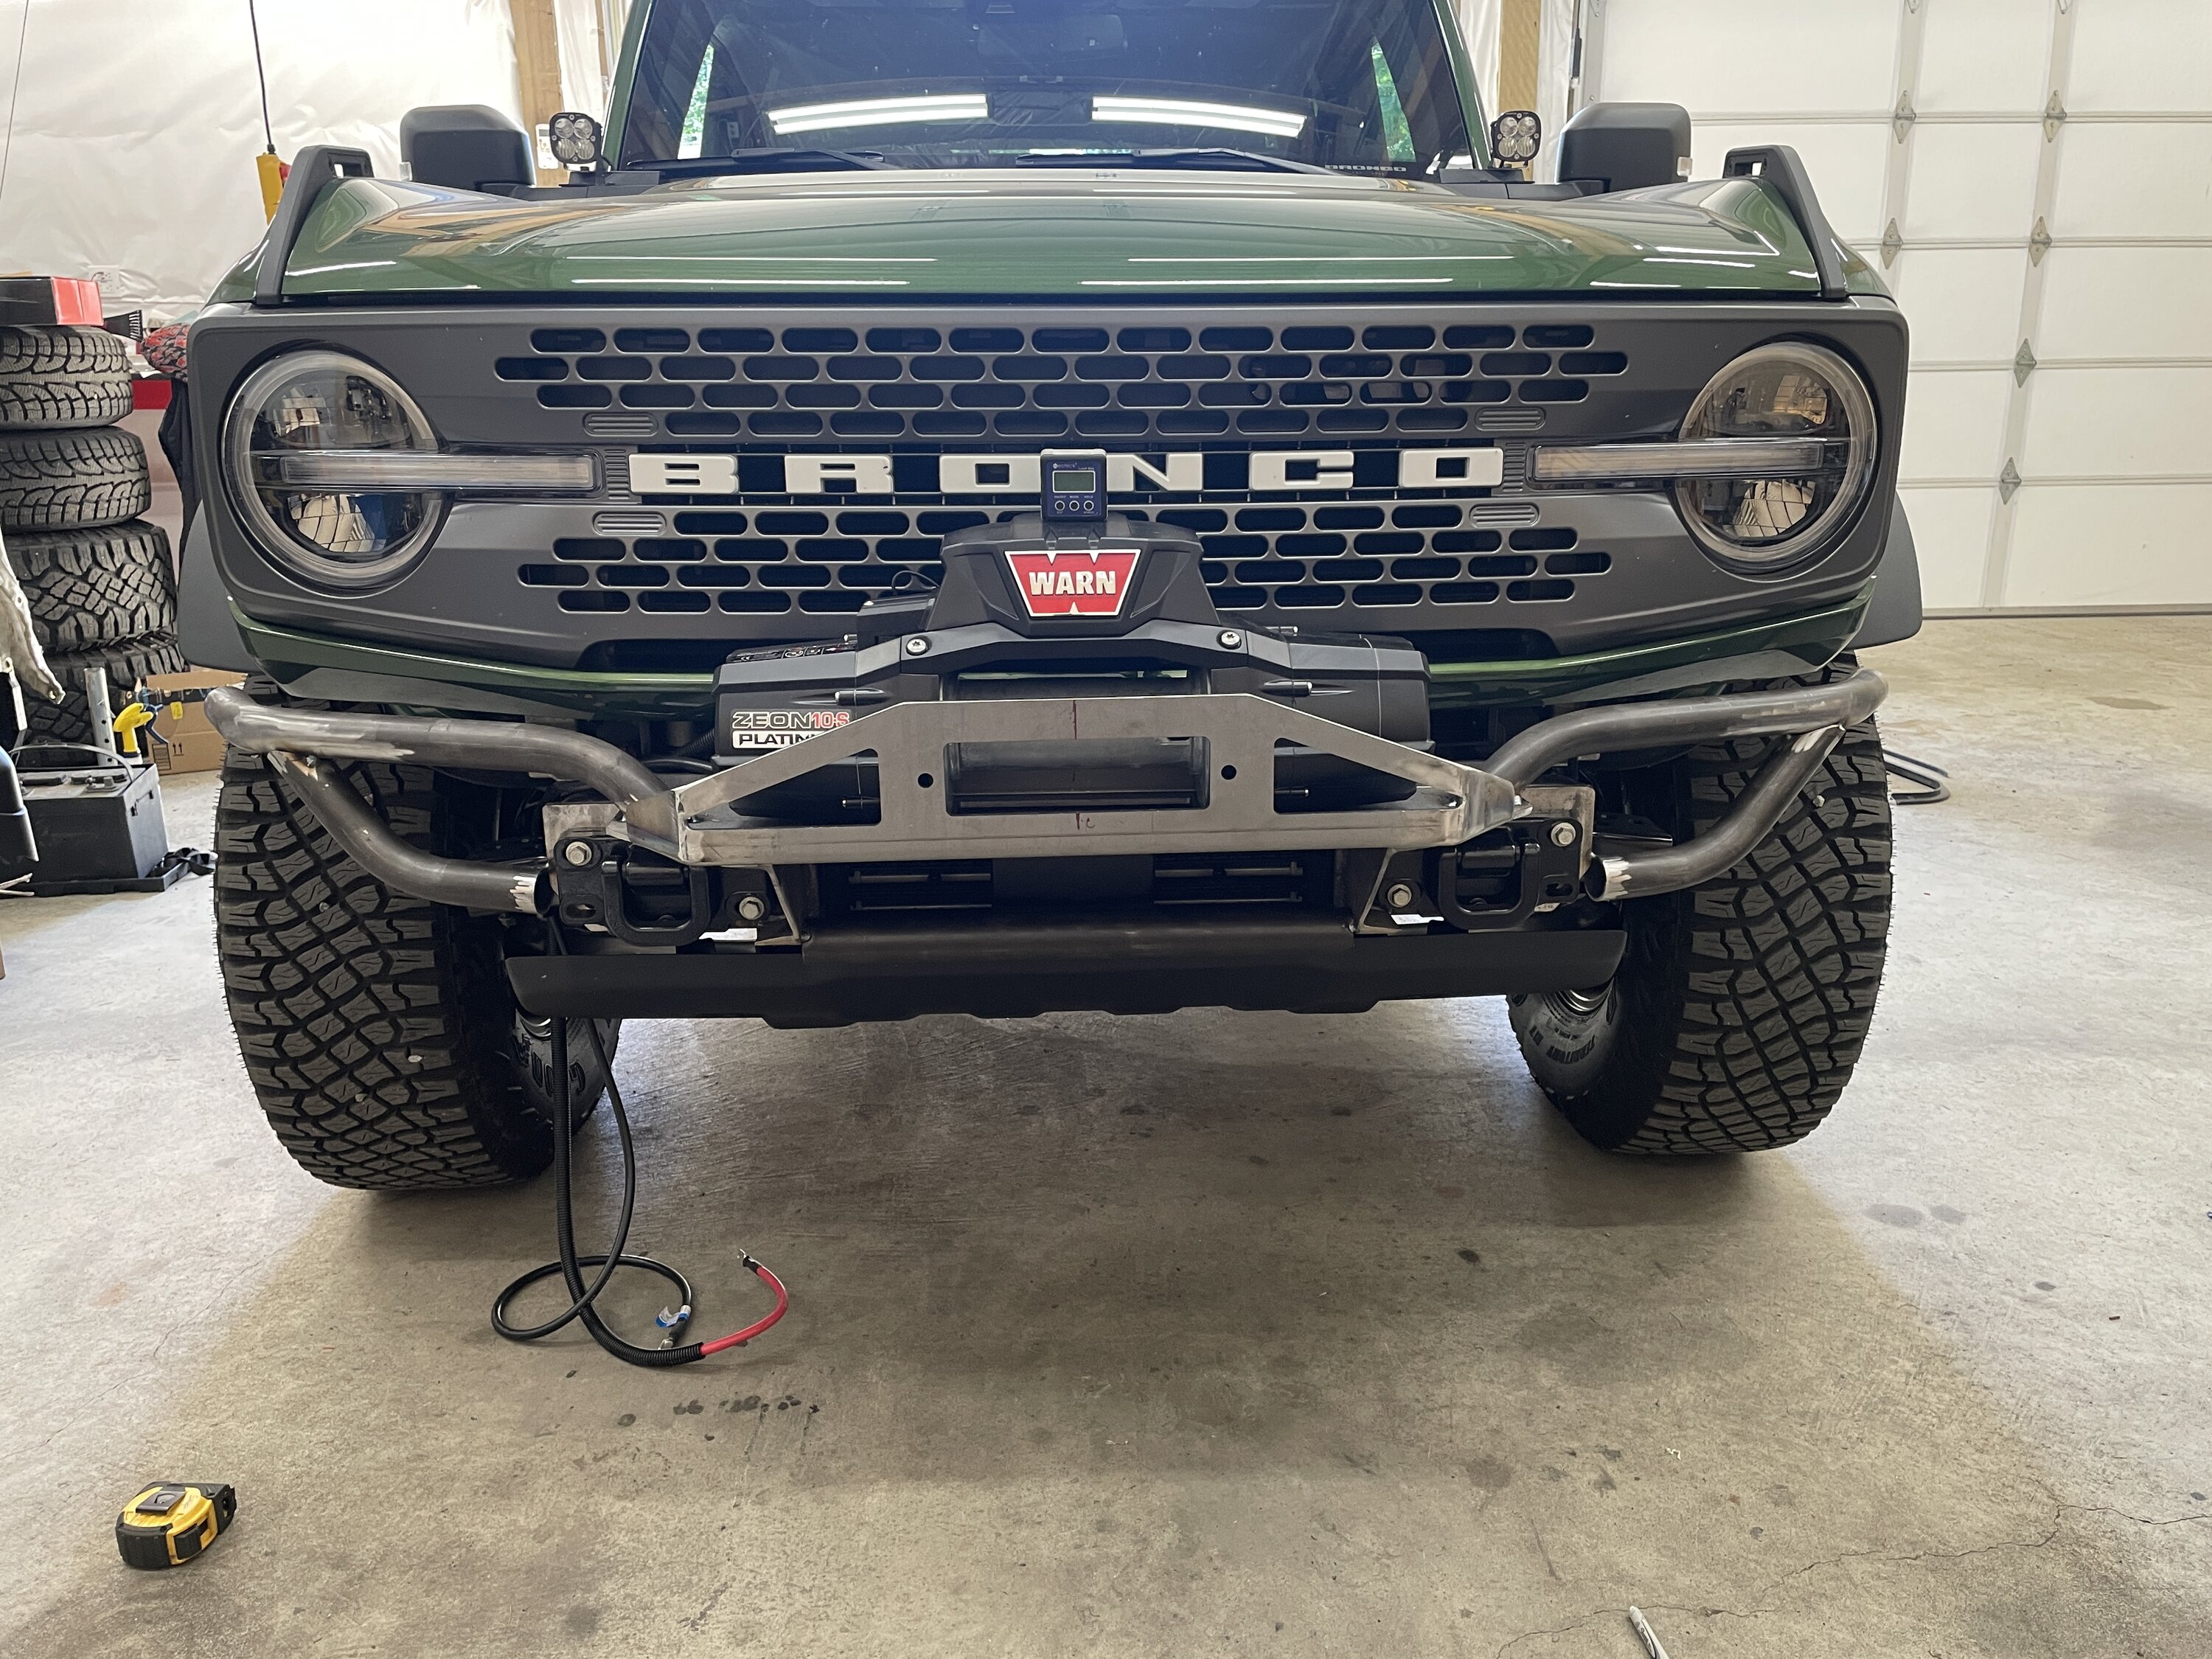 Ford Bronco My solution for a winch bumper 65BB3870-7975-443C-A78D-317E213321CD